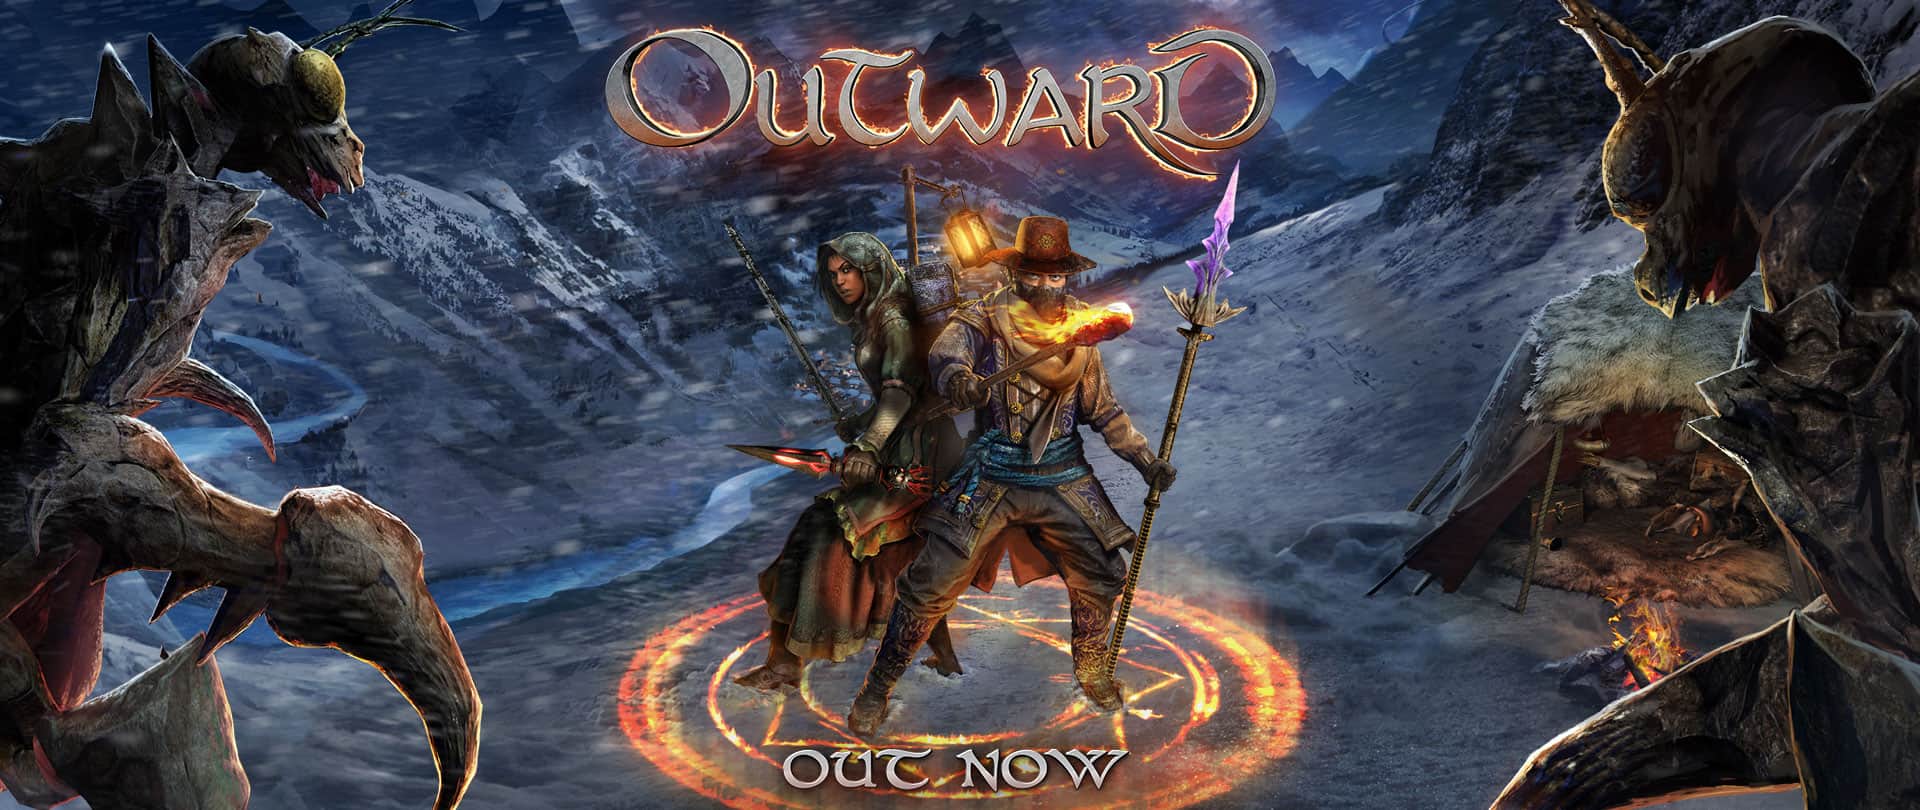 Outward PC Version Full Game Free Download